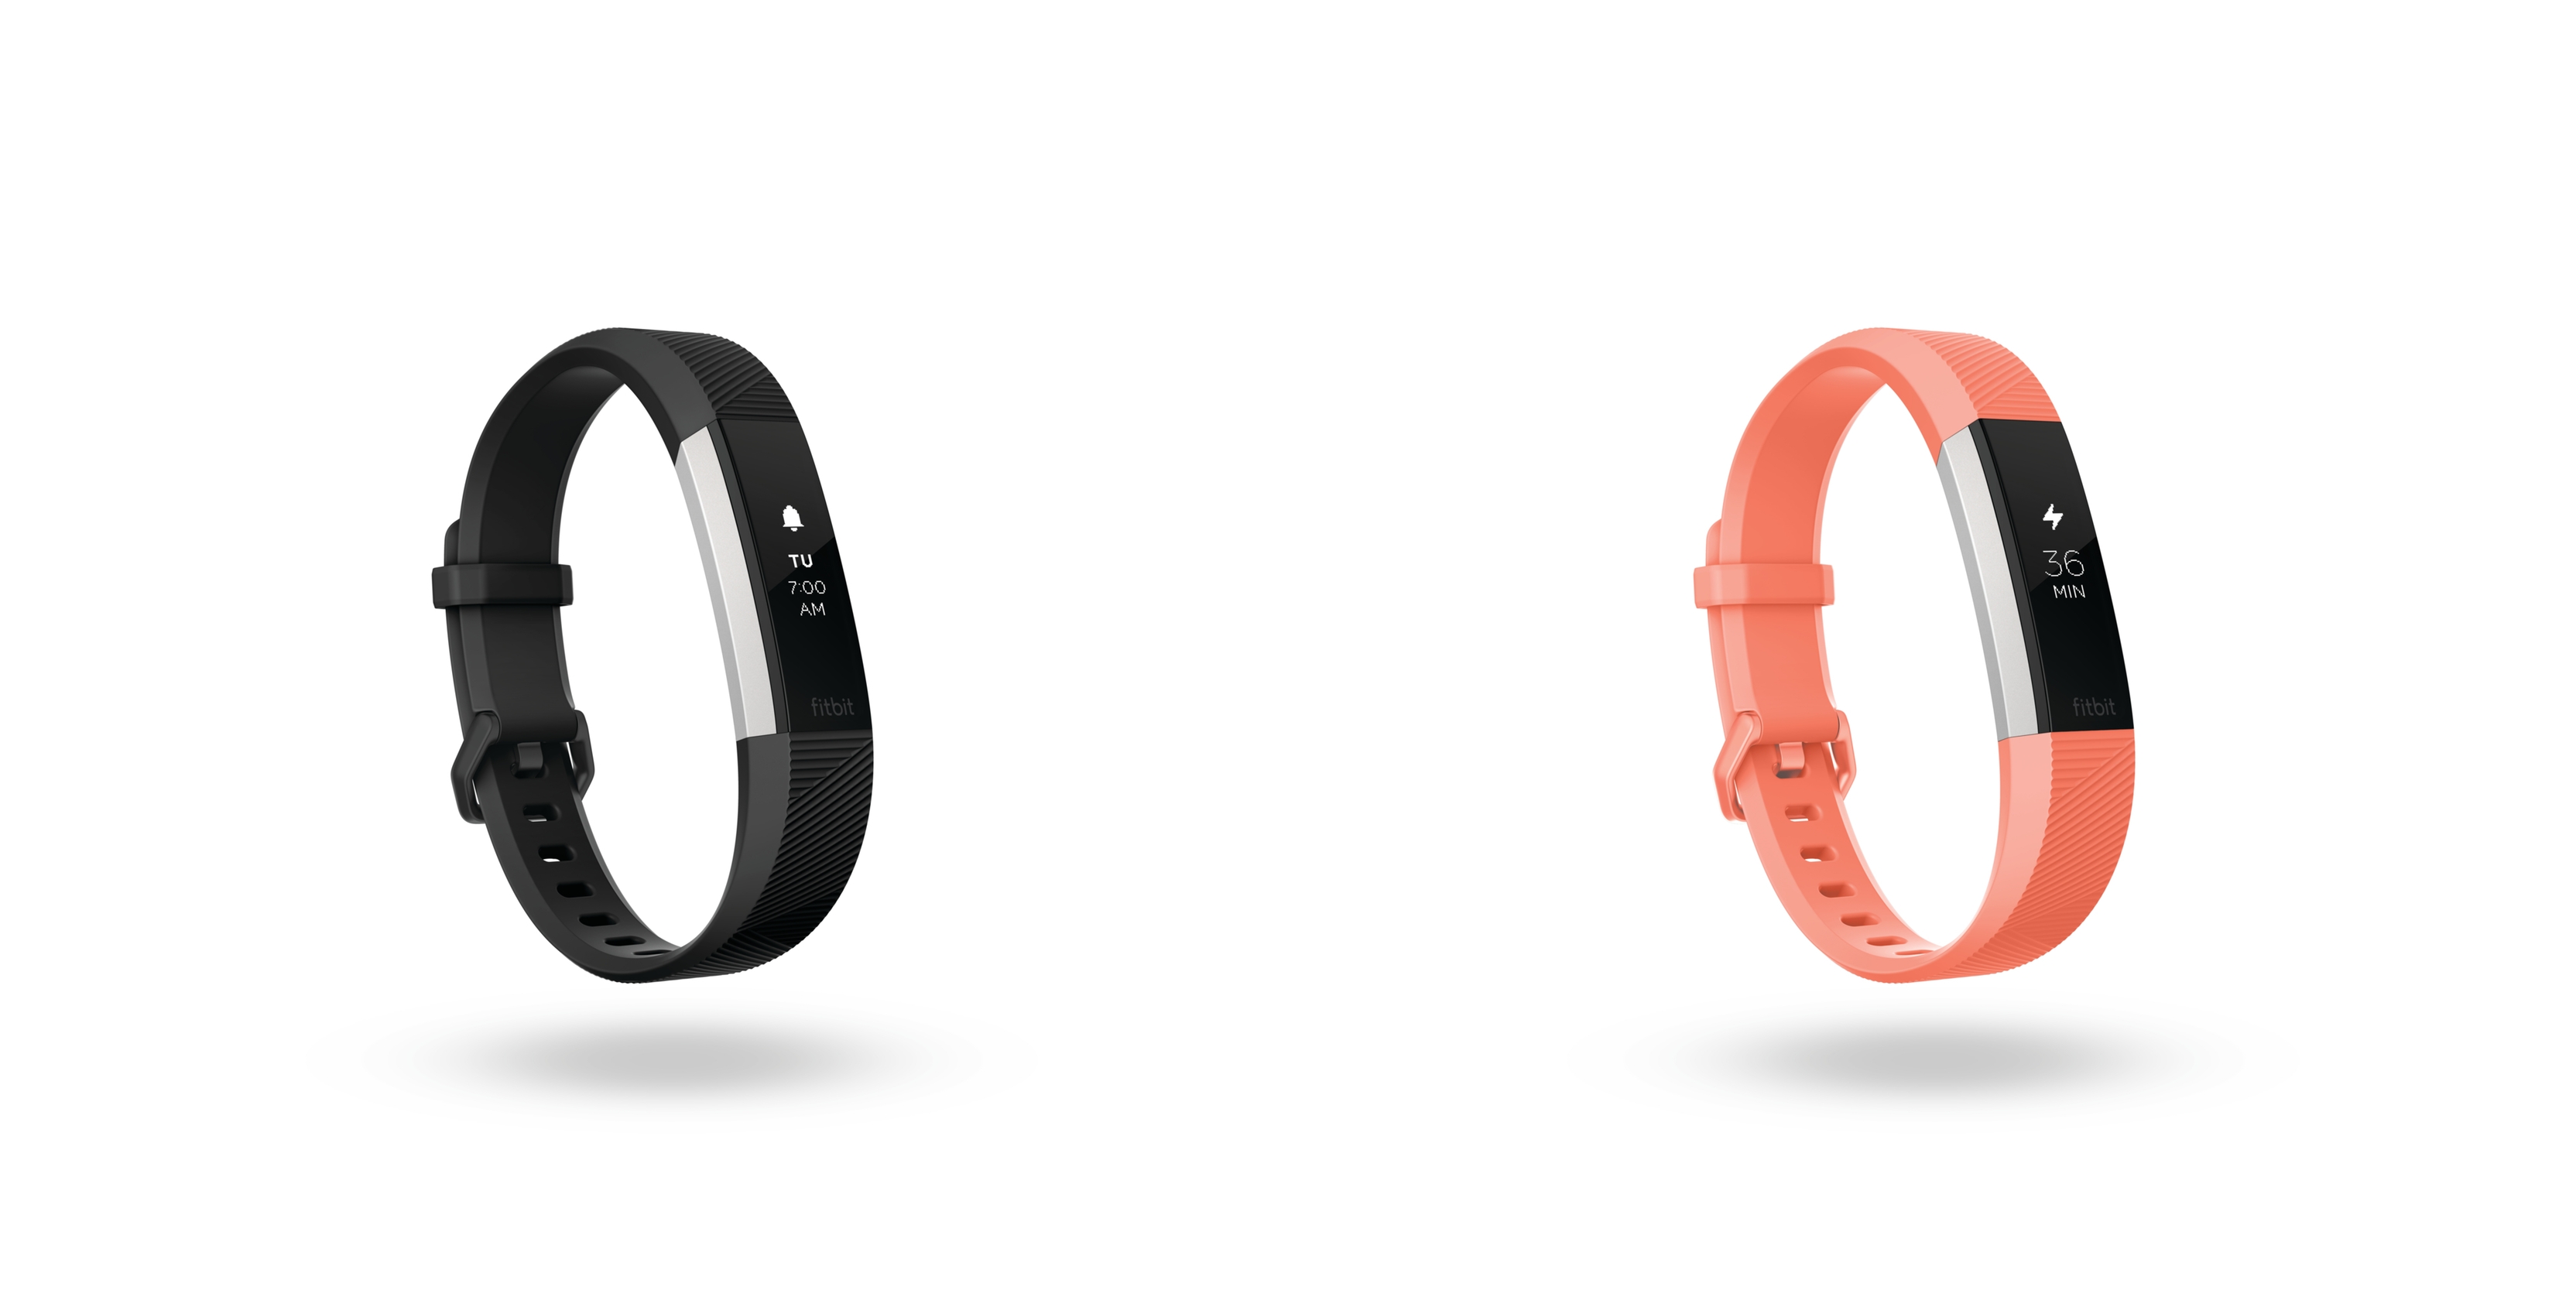 Fitbit Alta HR fitness trackers in black and coral